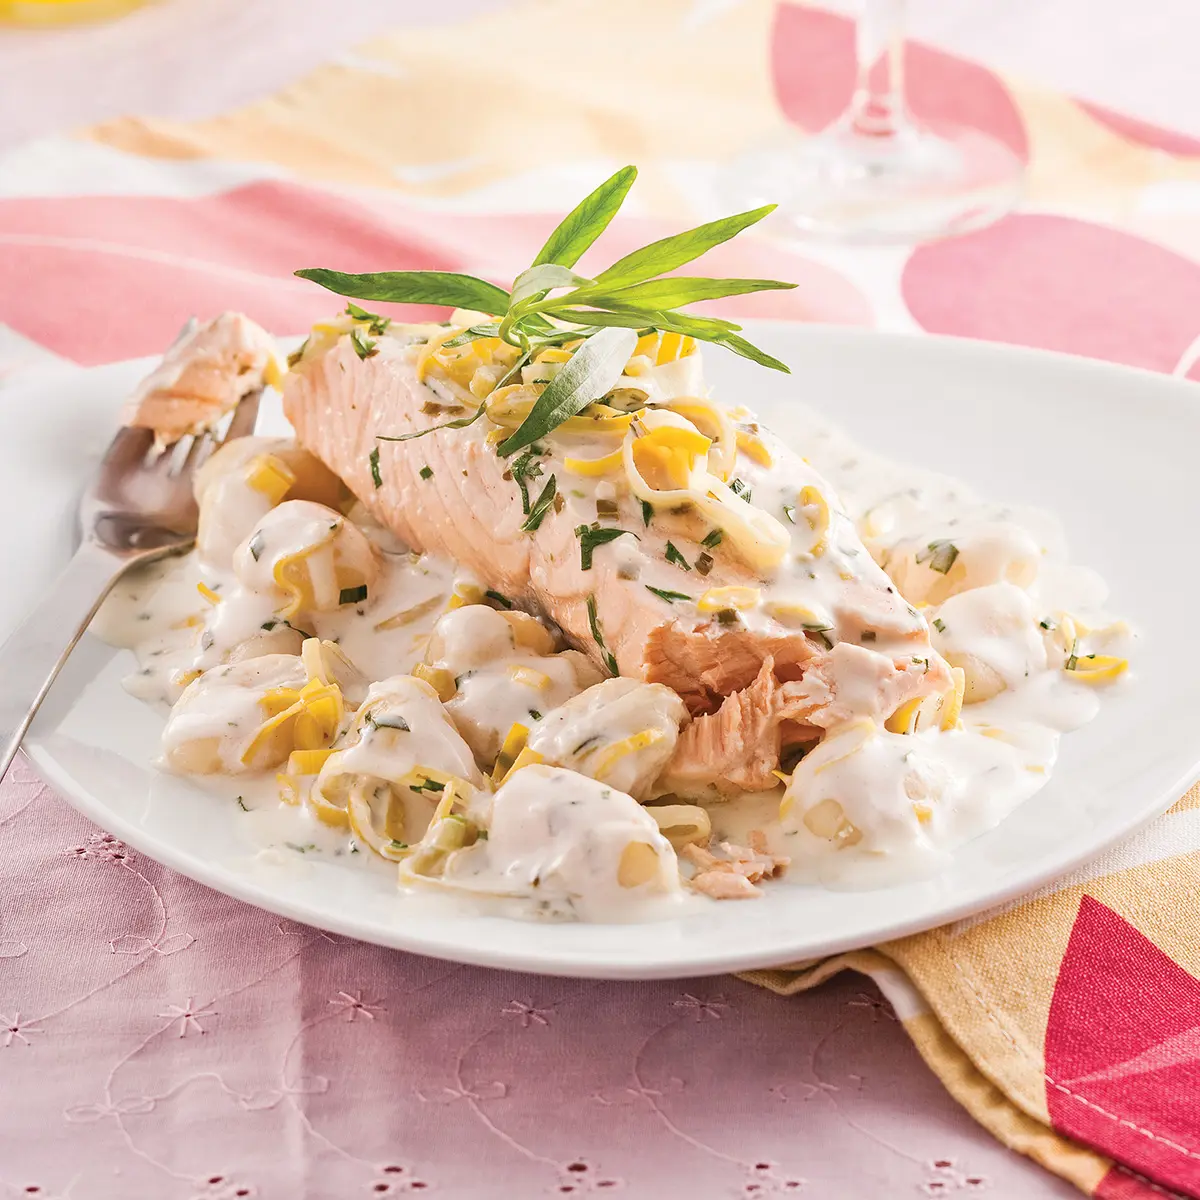 Salmon and gnocchis with leeks cream and tarragon